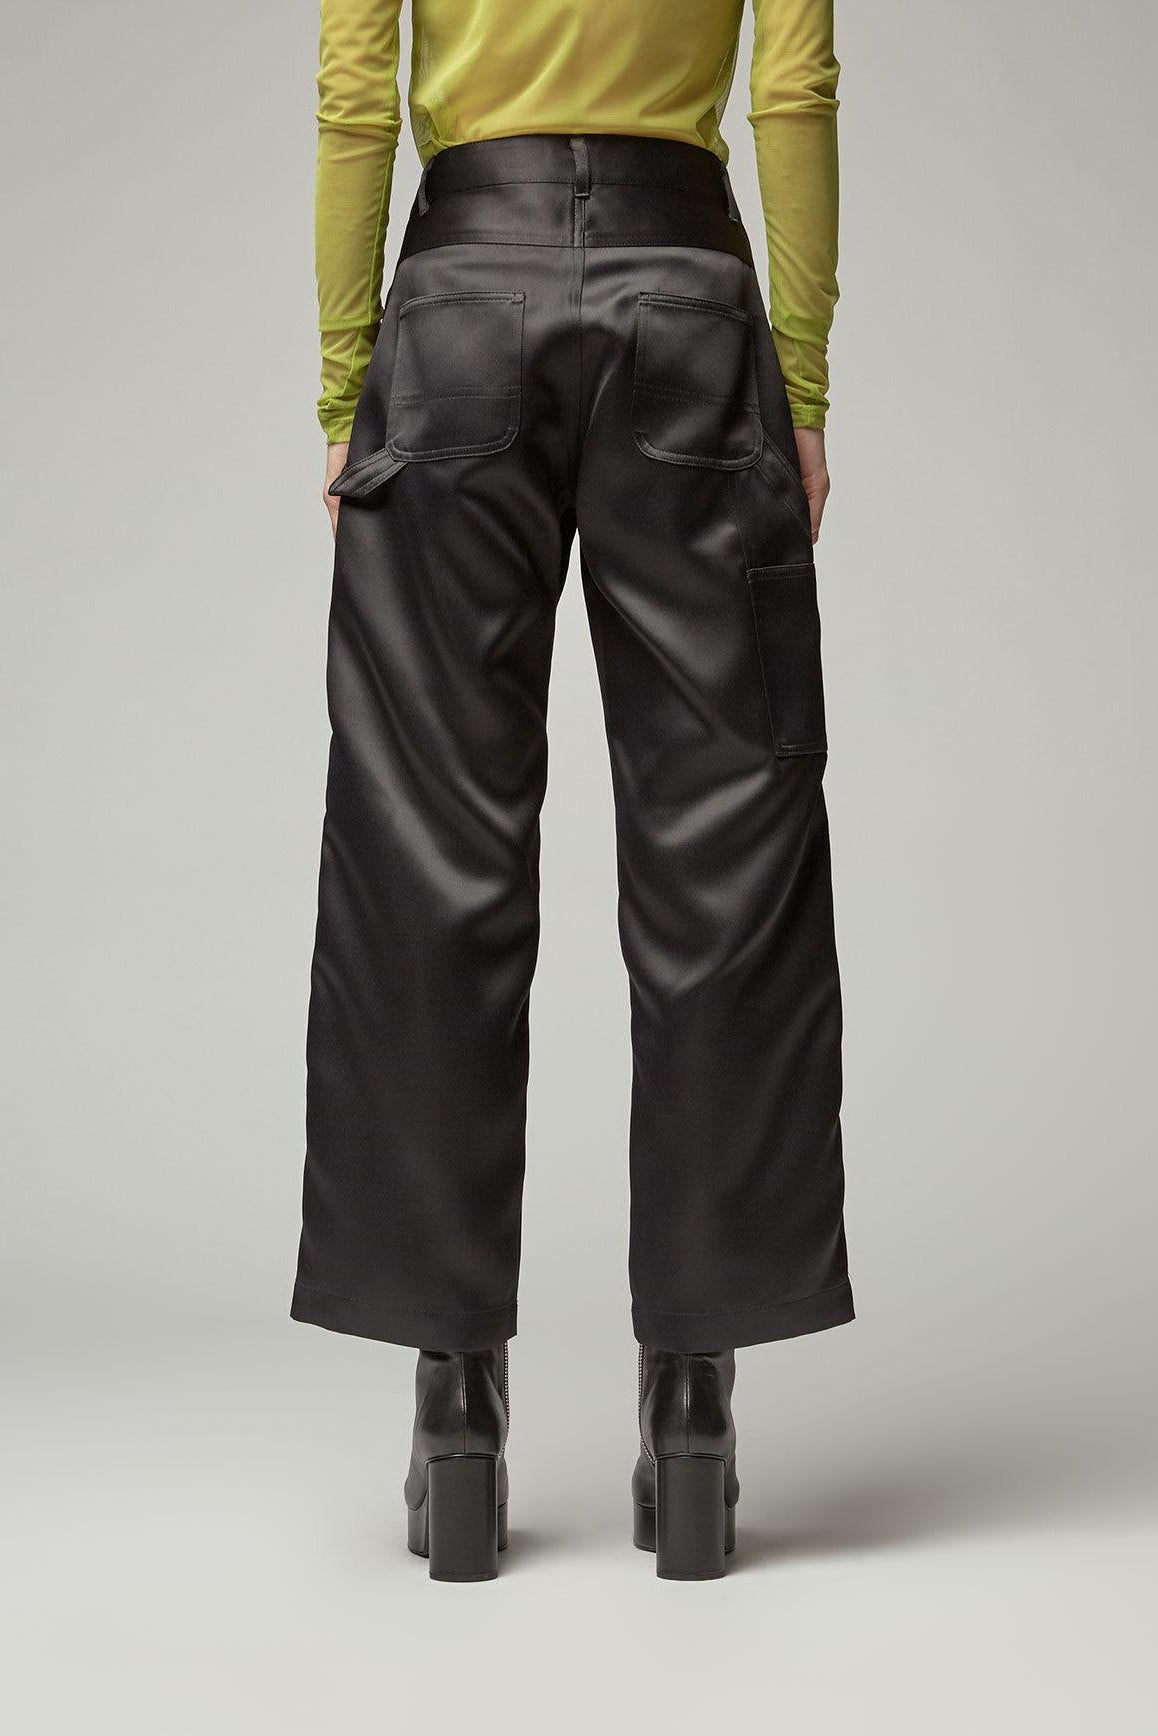 Painter Pants in Black Duchess Satin by Nomia